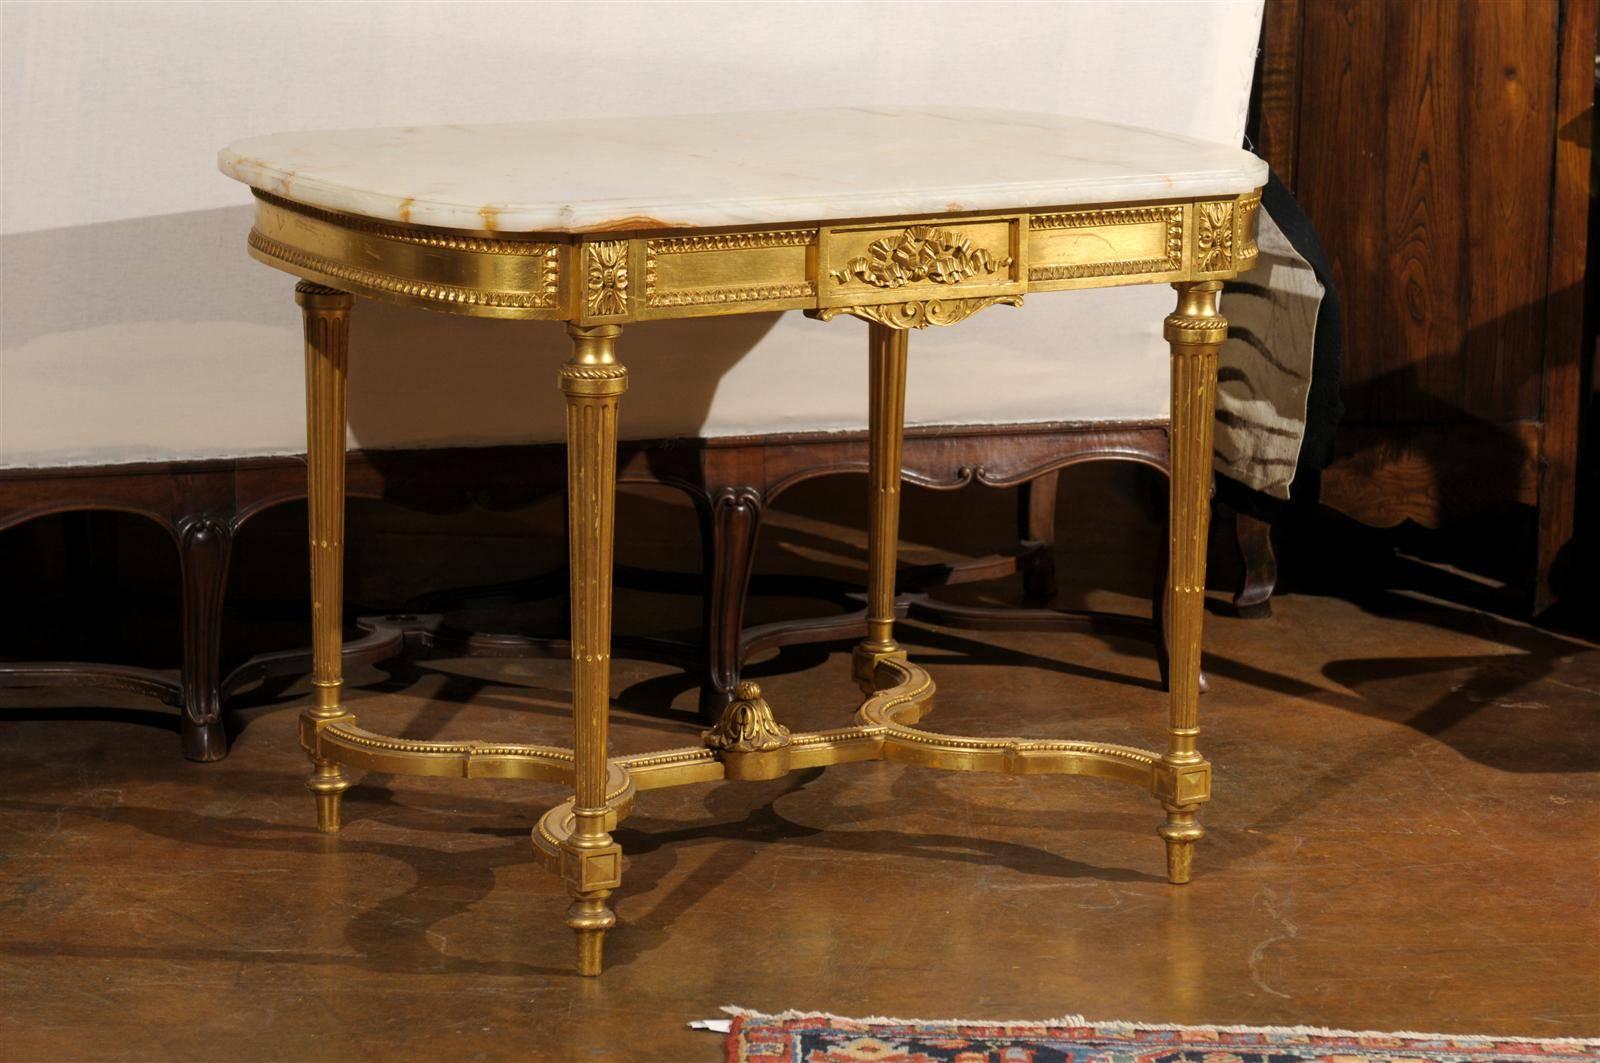 A French Louis XVI style center table with giltwood structure and onyx top from the 19th century. This exquisite French Louis XVI century center table features a shaped onyx top supported by a giltwood base. The carved apron is delicately adorned